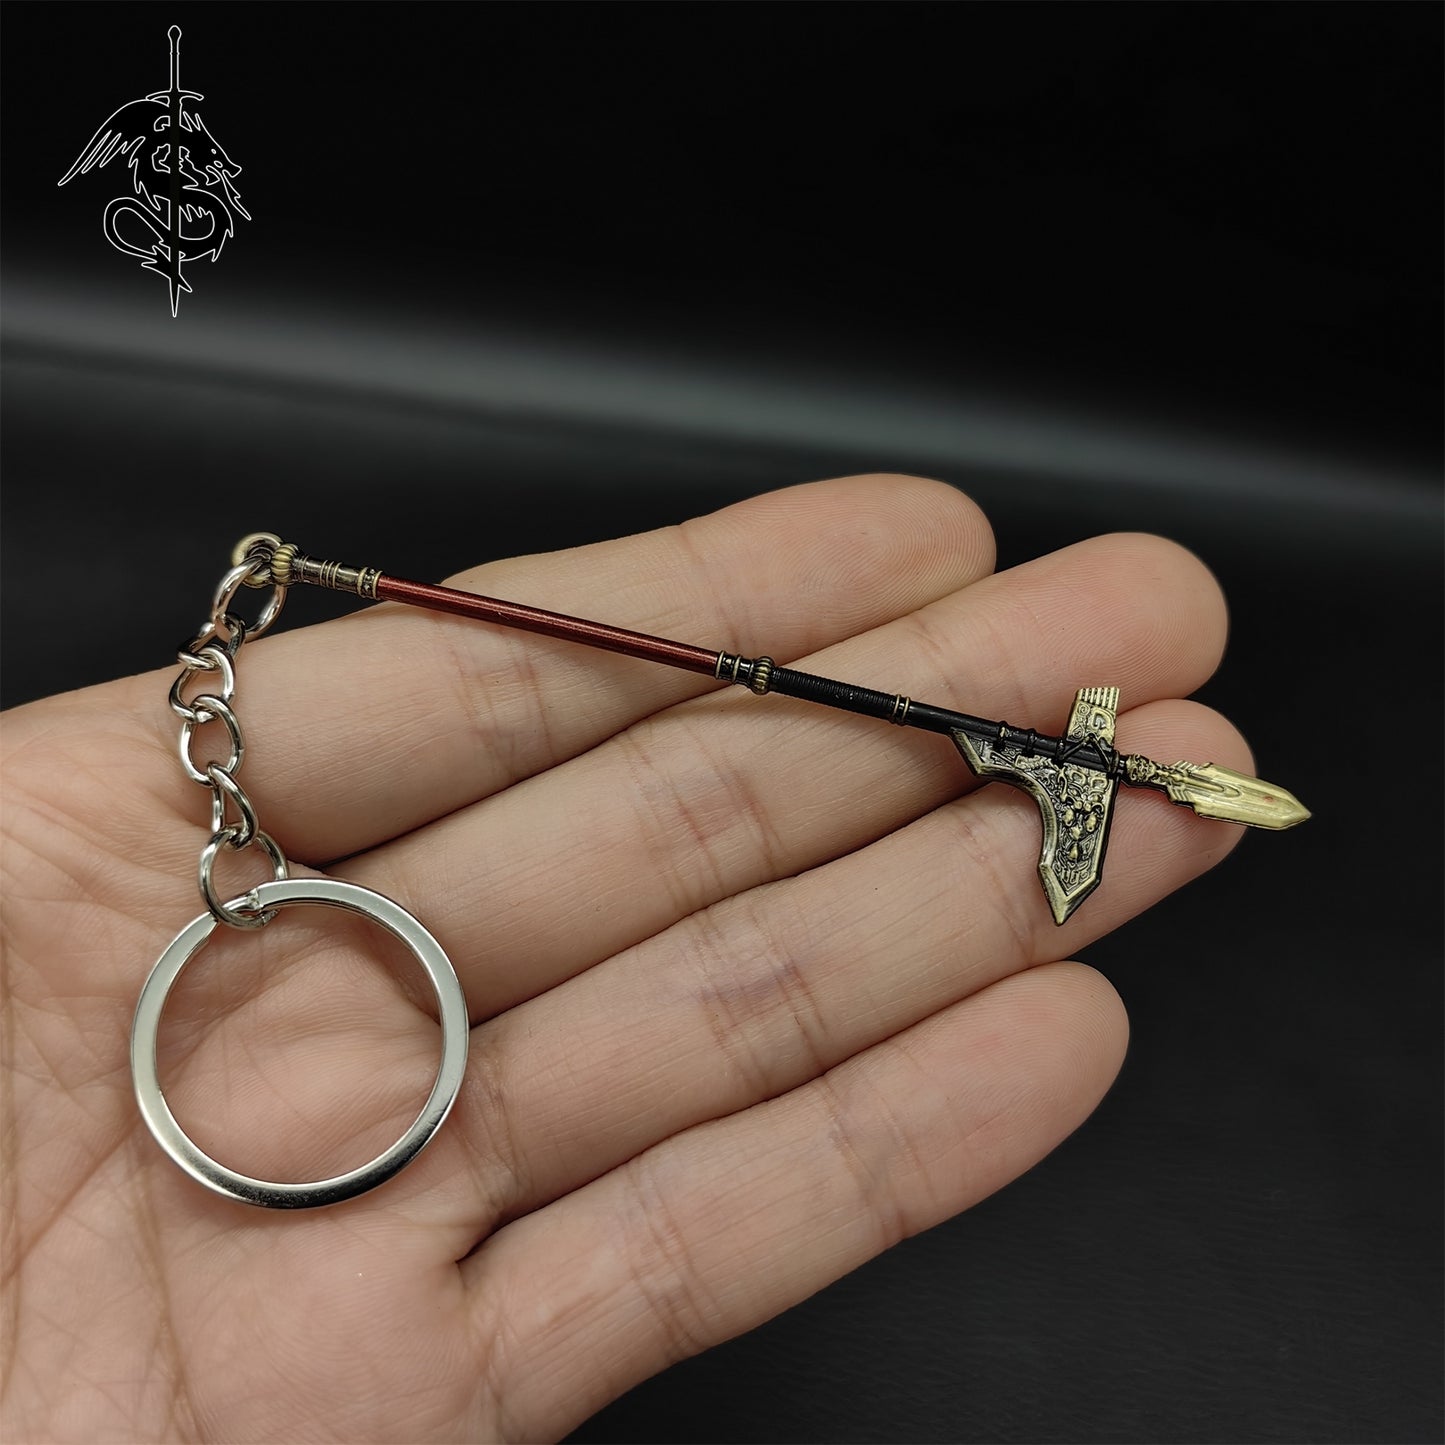 The Investiture of The Gods Mini Swords keychain